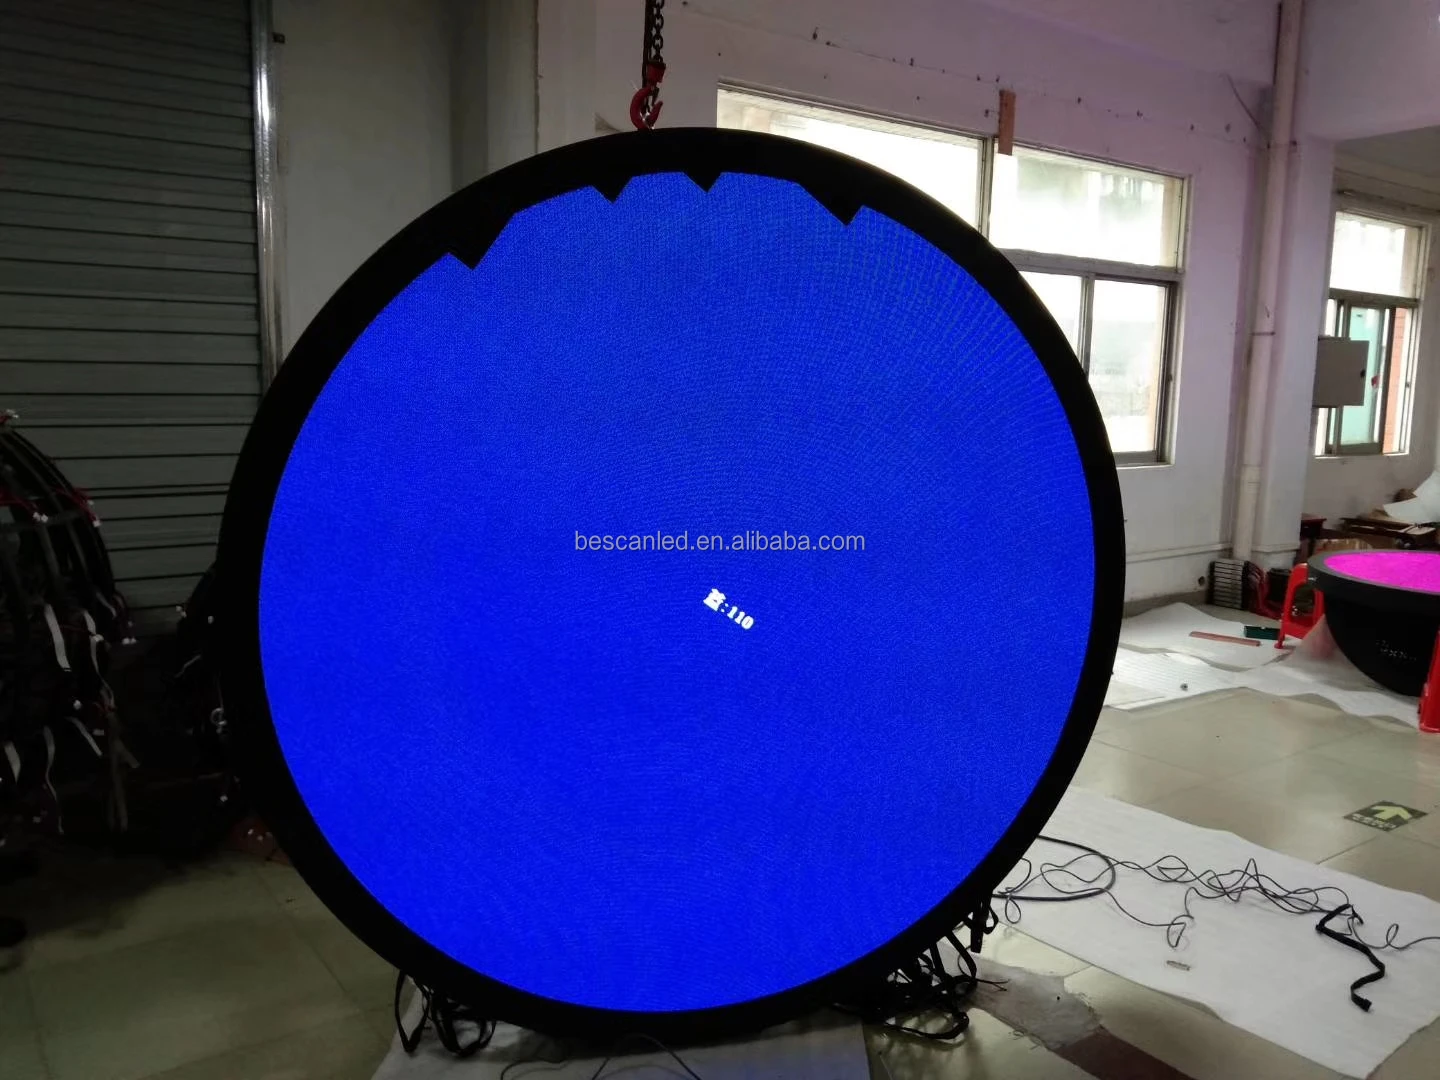 Source Concert Stage Background LED Circle Video Wall Indoor Outdoor Round Screen Custom size Circular Ring Shaped Panel on